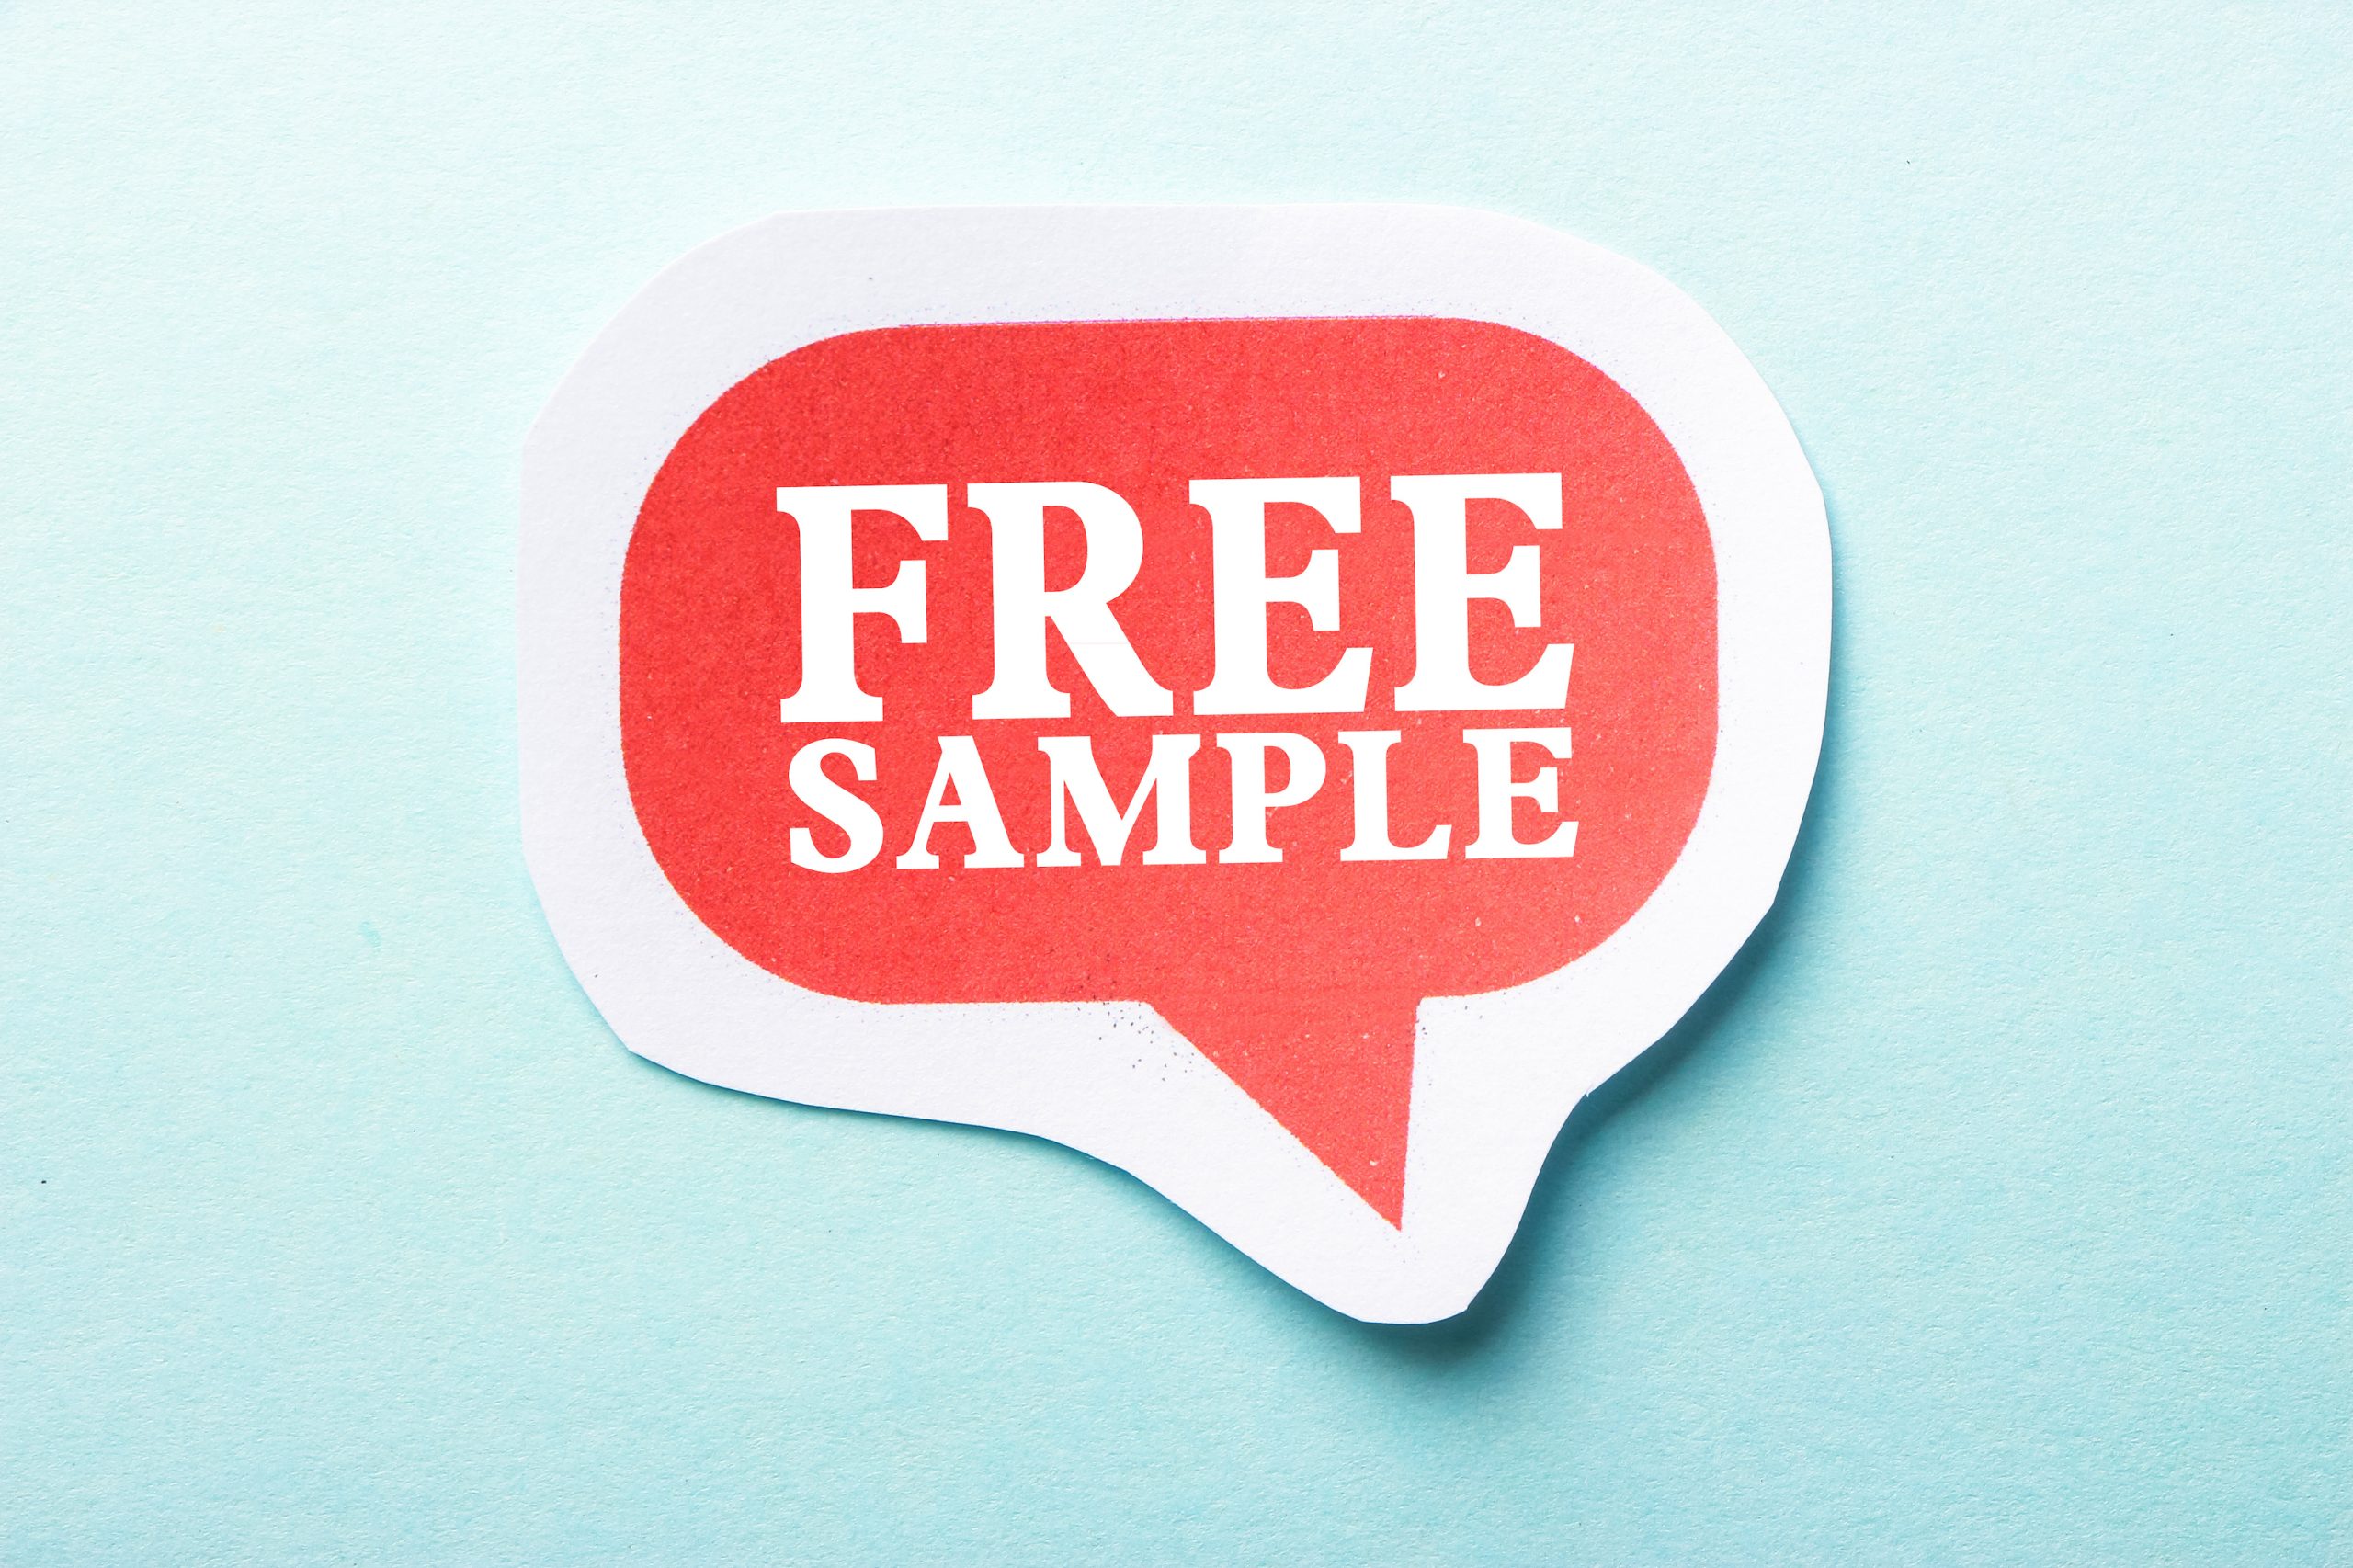 Image depicting a soft blue gradient field, in the center of which is a large red word balloon stating, "Free Samples".